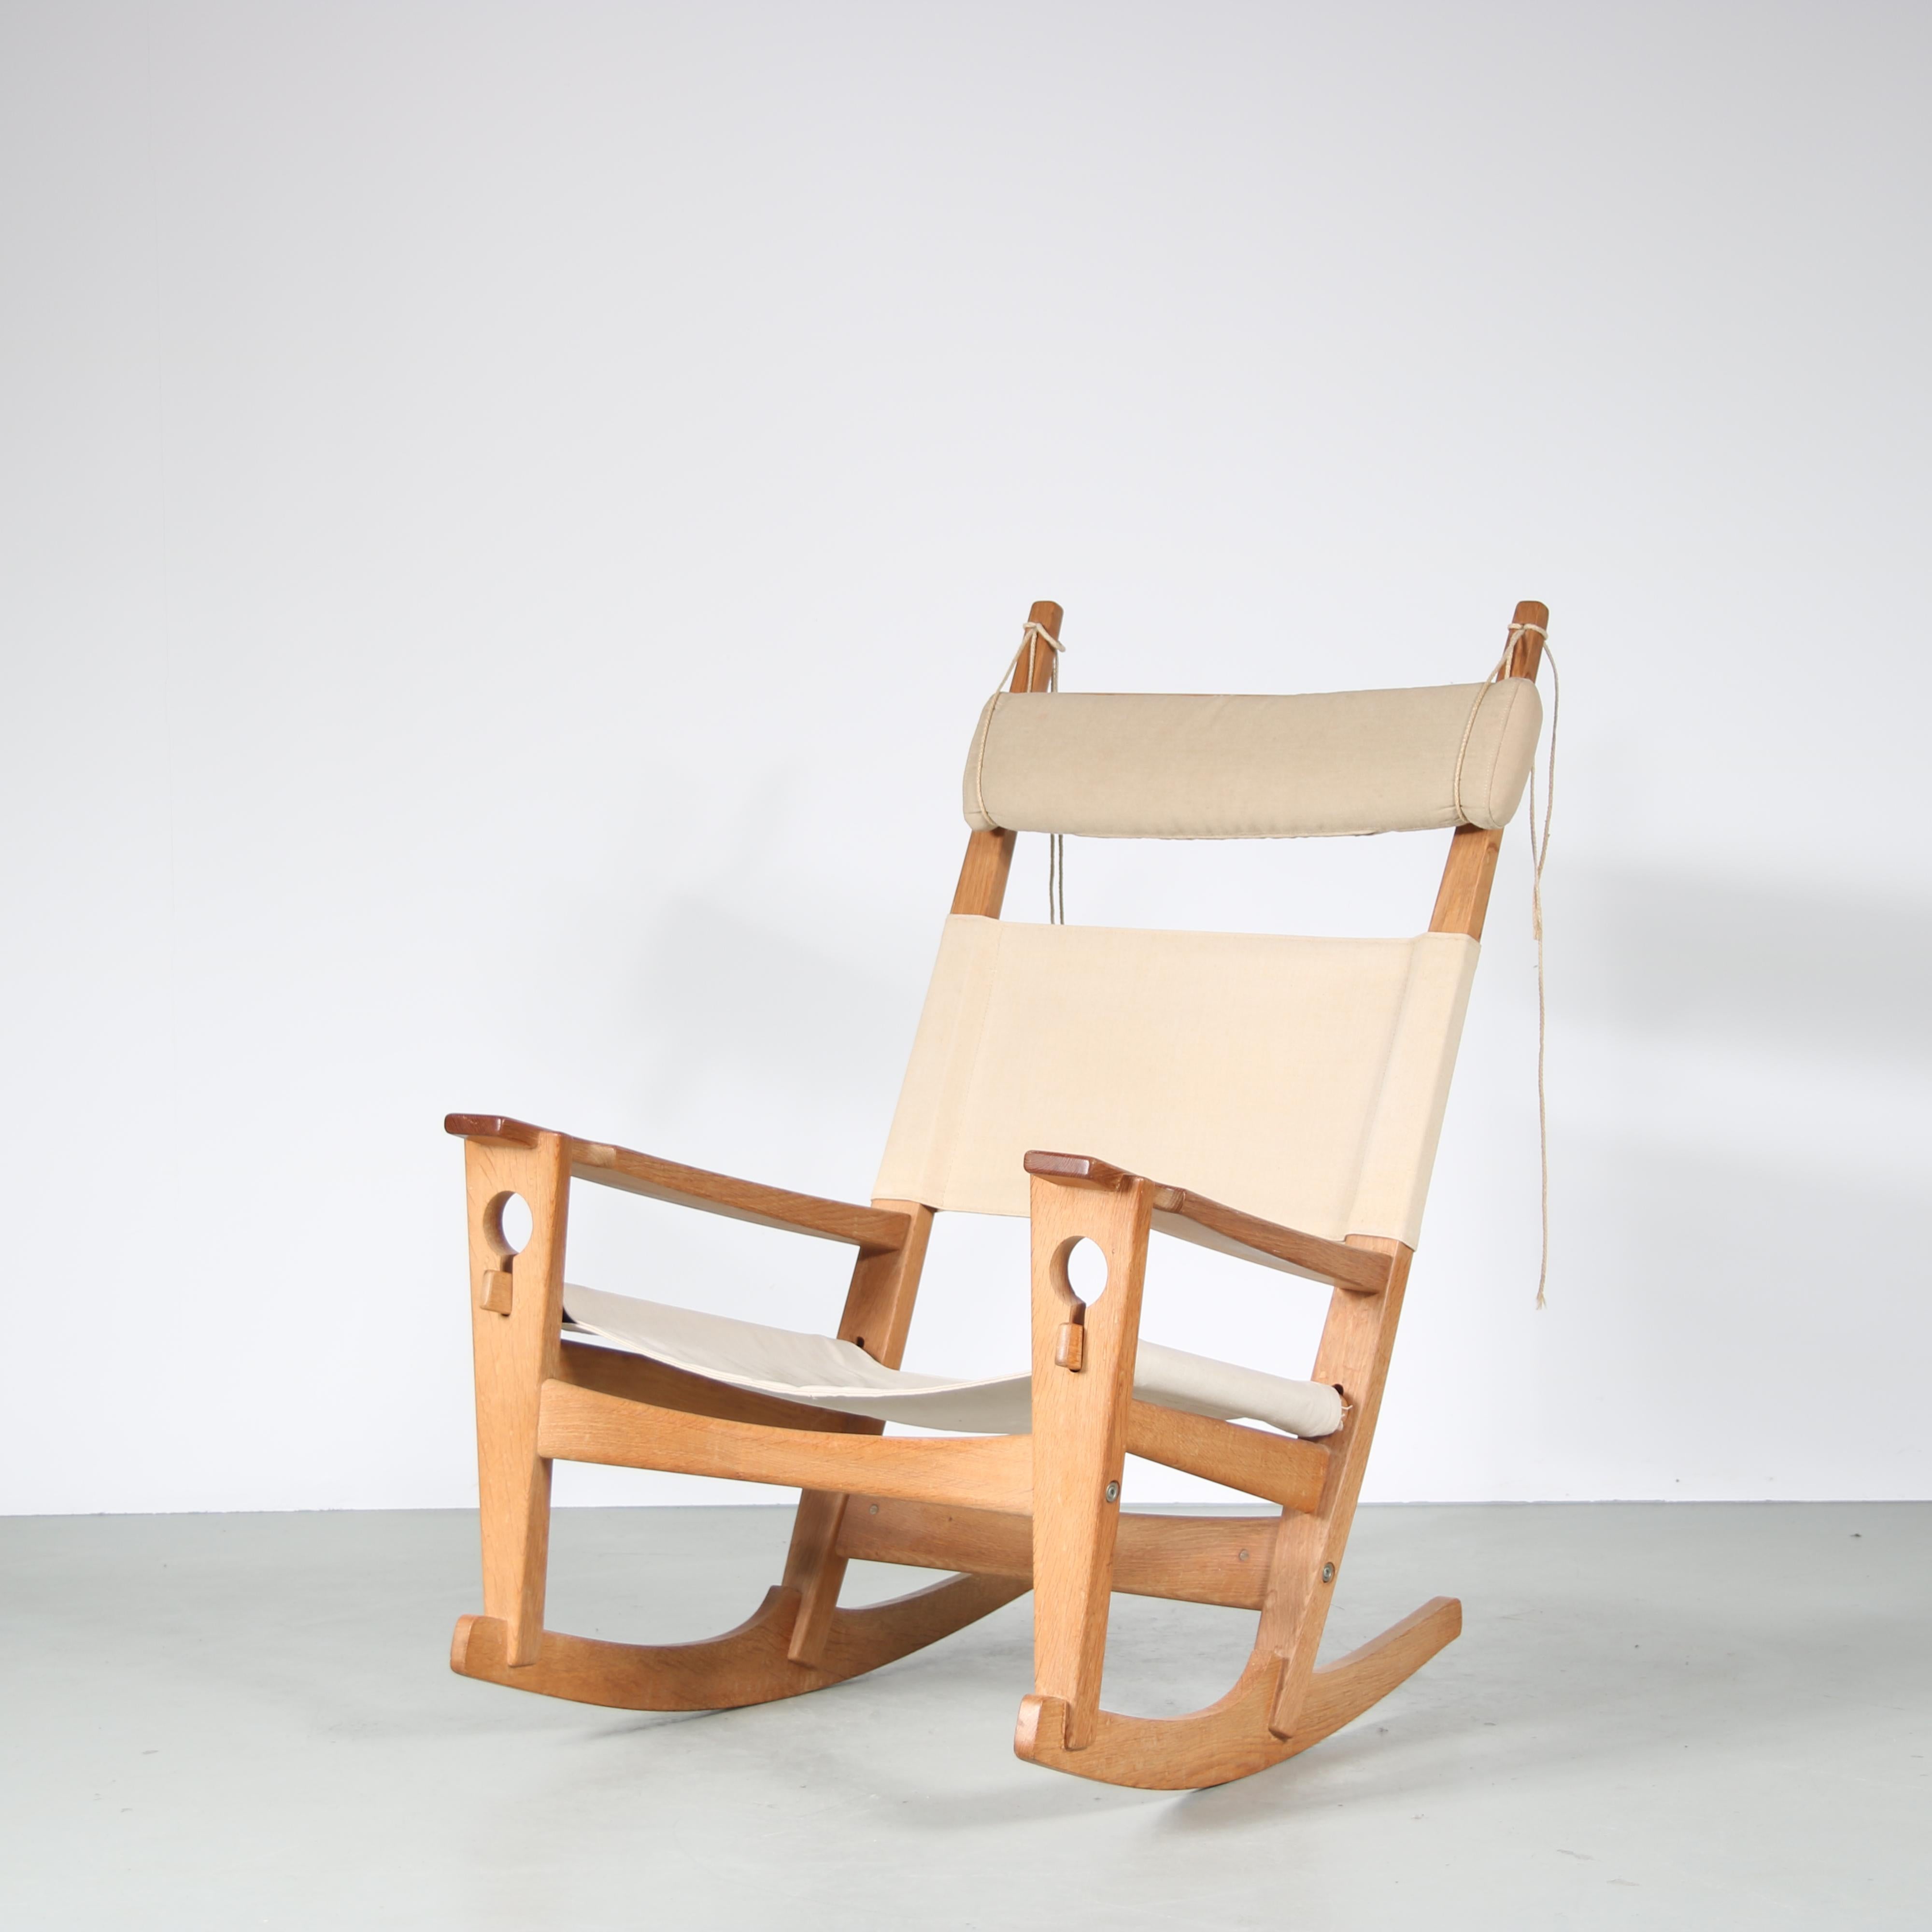 Stunning rocking chair model “Keyhole” designed by Hans J. Wegner, manufactured by Getama in Denmark, circa 1960.

This iconic chair is made of the highest quality oak wood with unique keyhole-shaped joinery, making it a highly recognizable piece.